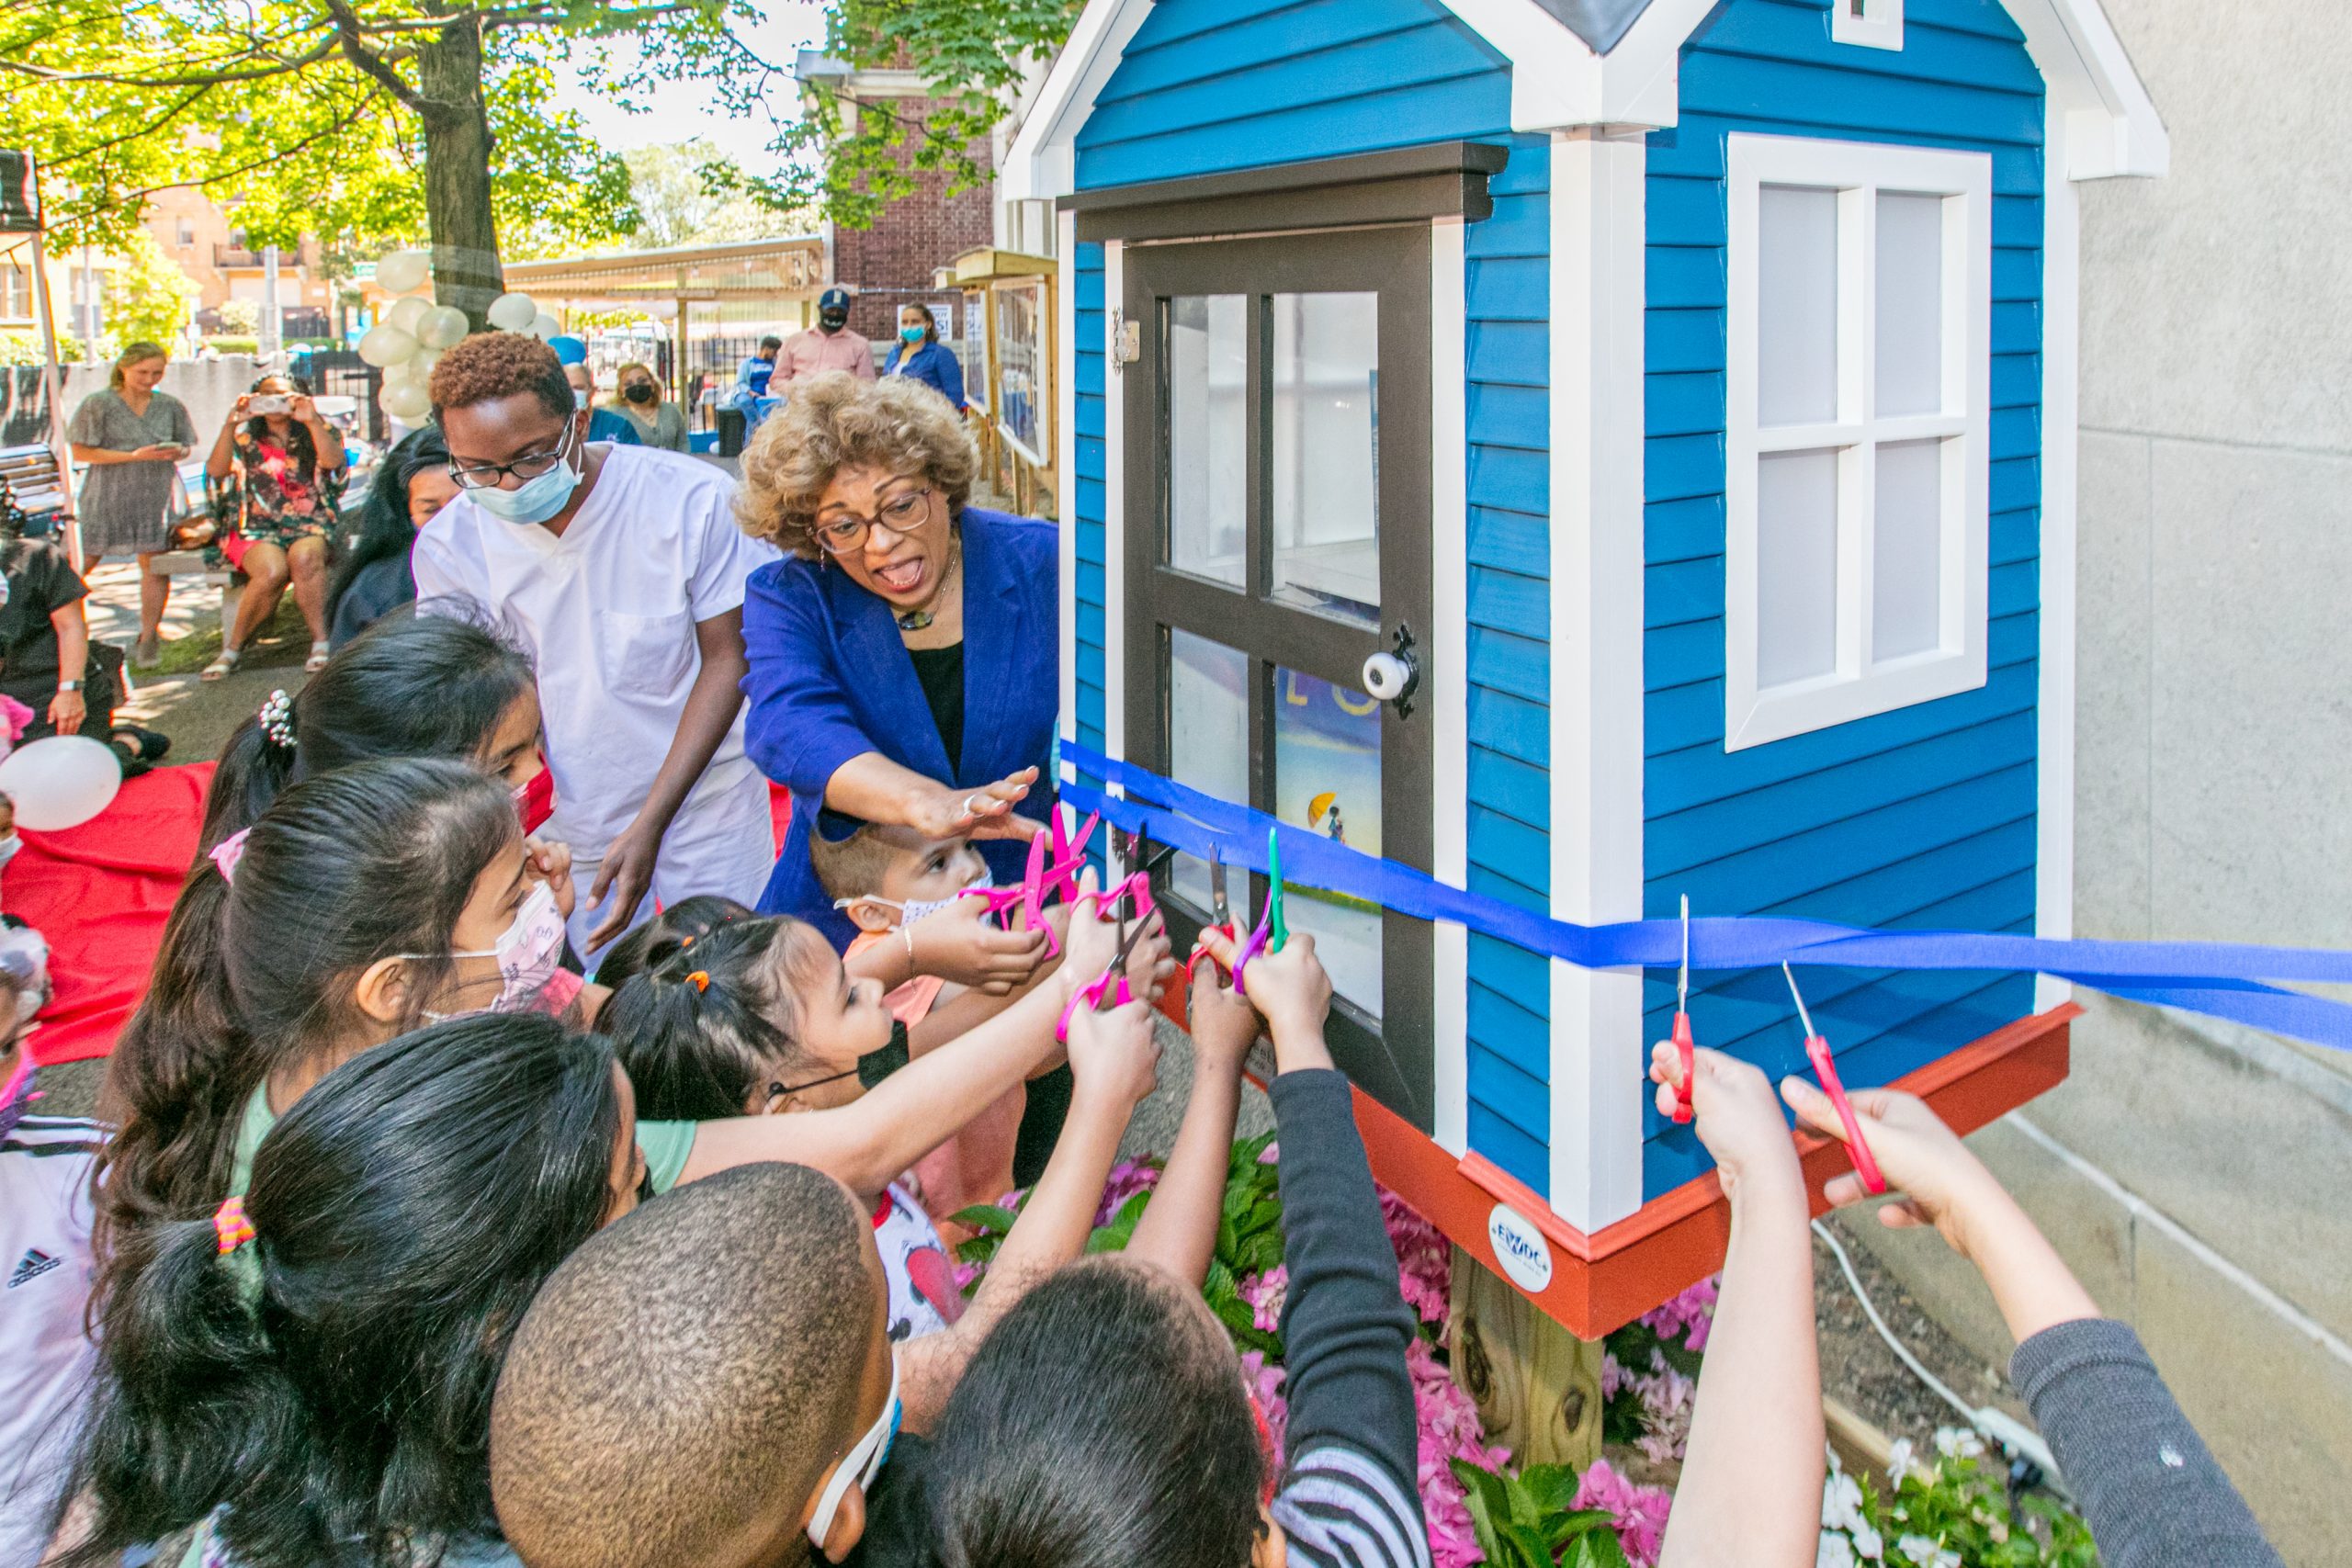 Little Free Library Read in Color Initiative